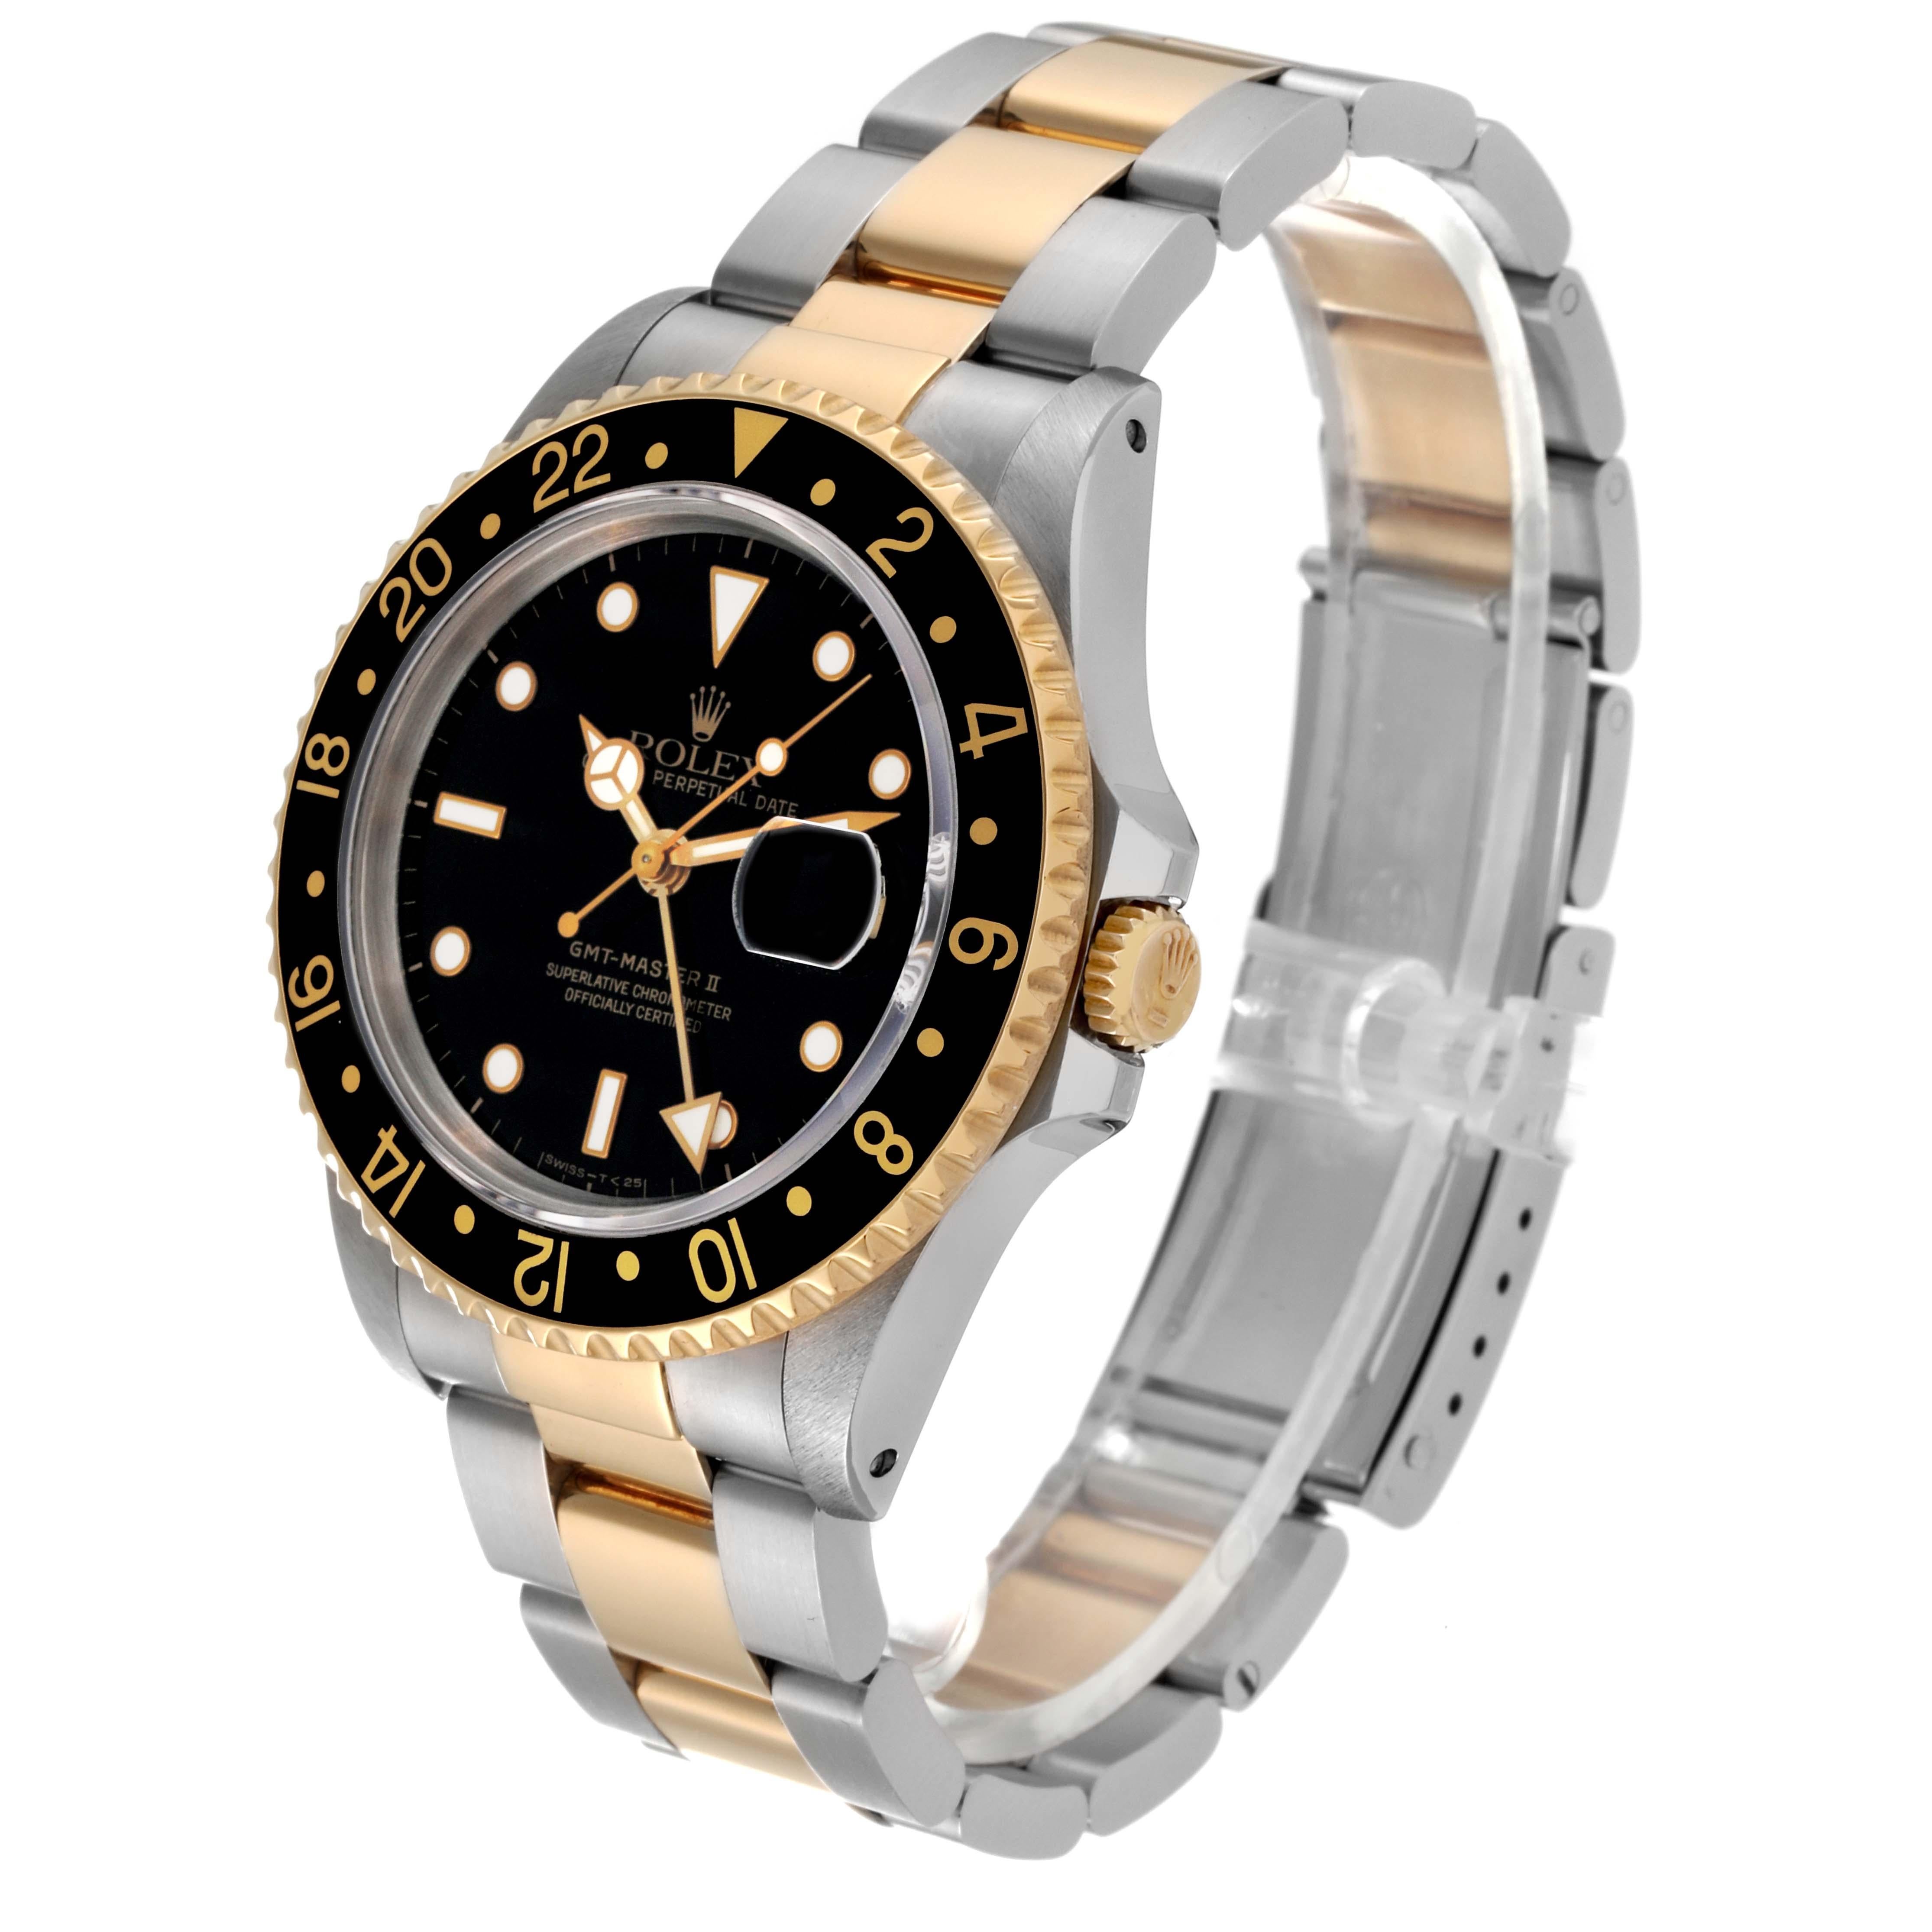 Rolex GMT Master II Yellow Gold Steel Oyster Bracelet Mens Watch 16713 For Sale 7